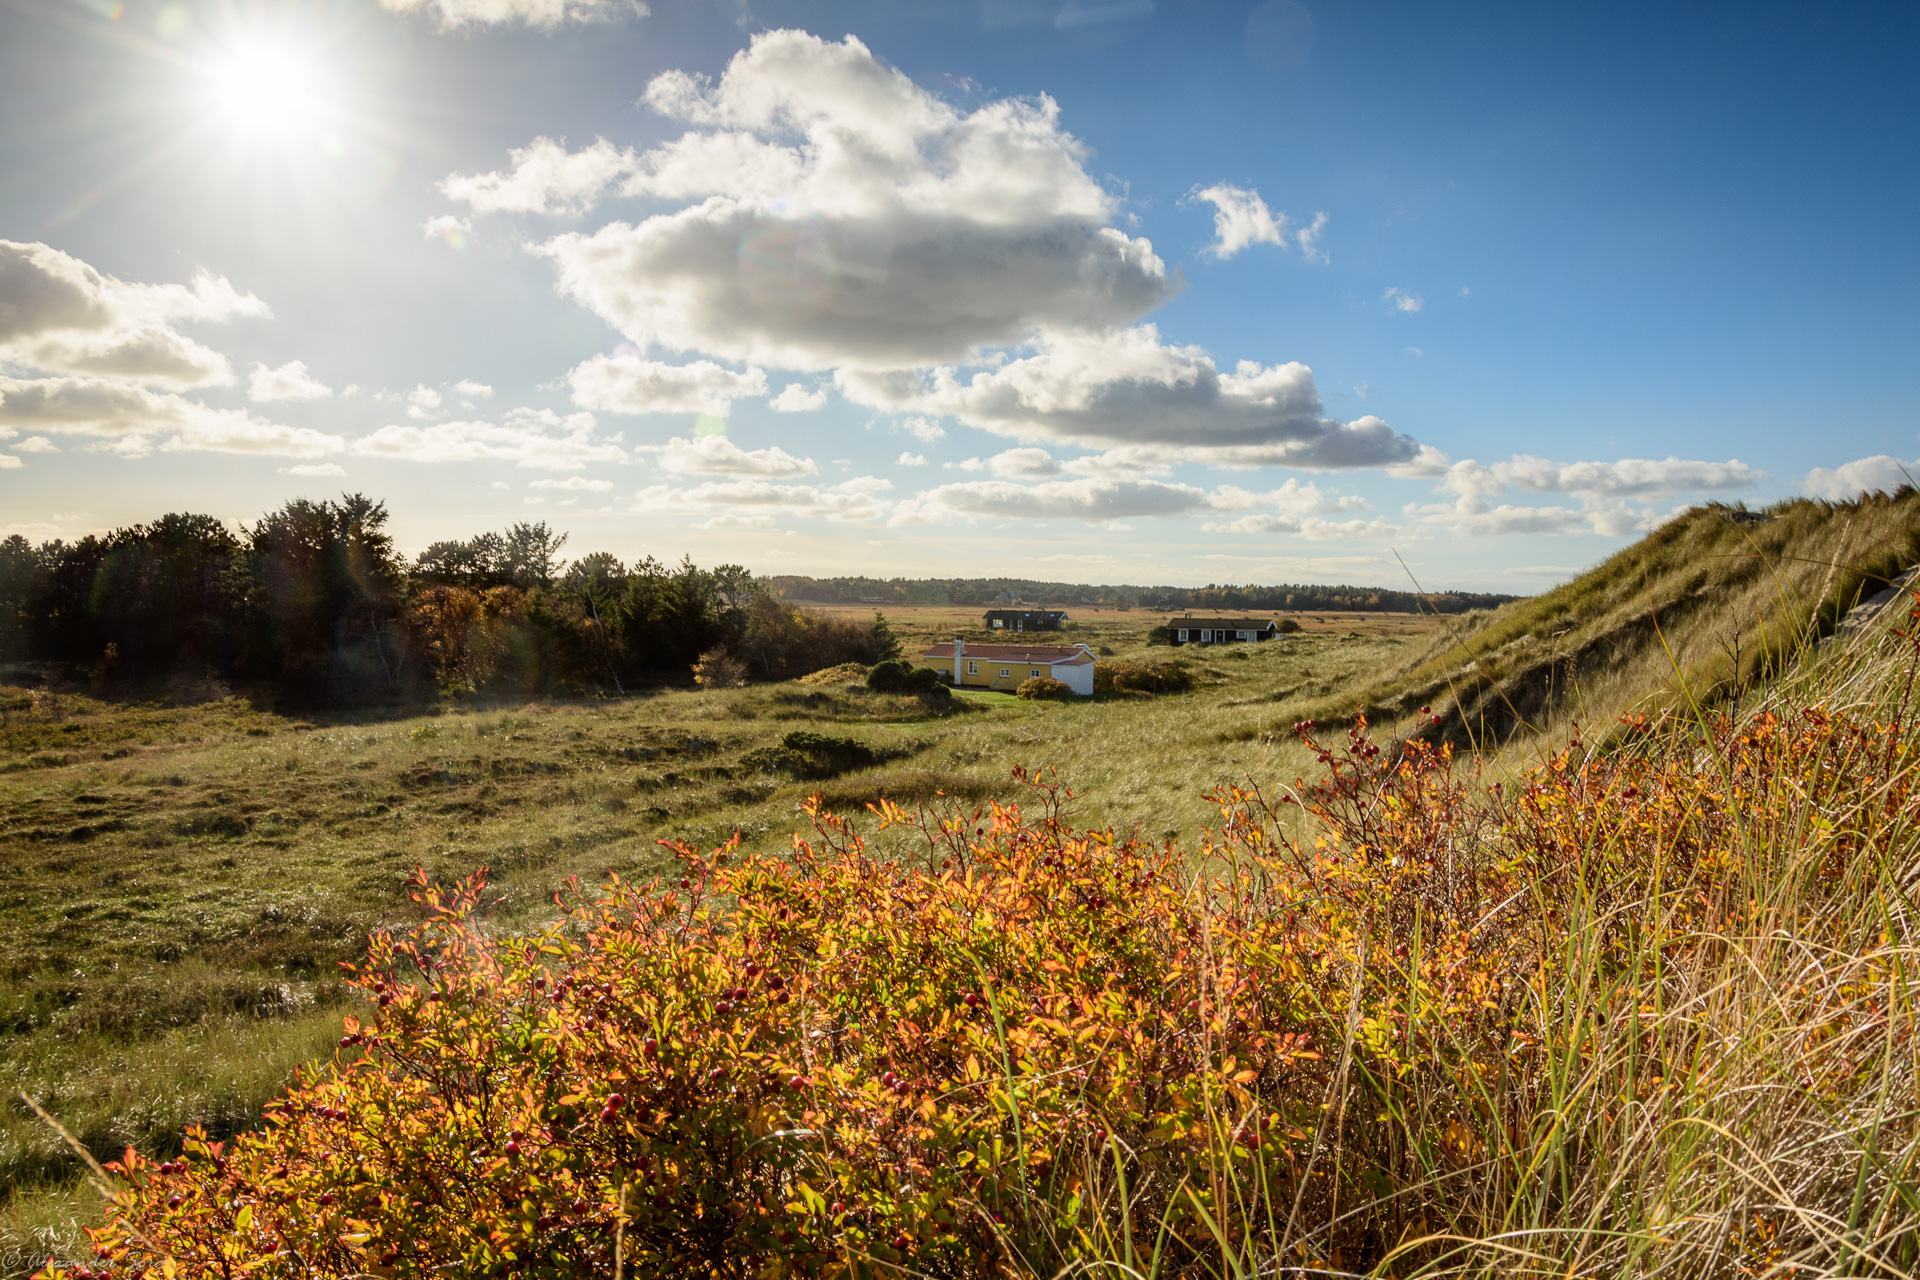 Daily Dose of Denmark: Behind the dunes of Læsø